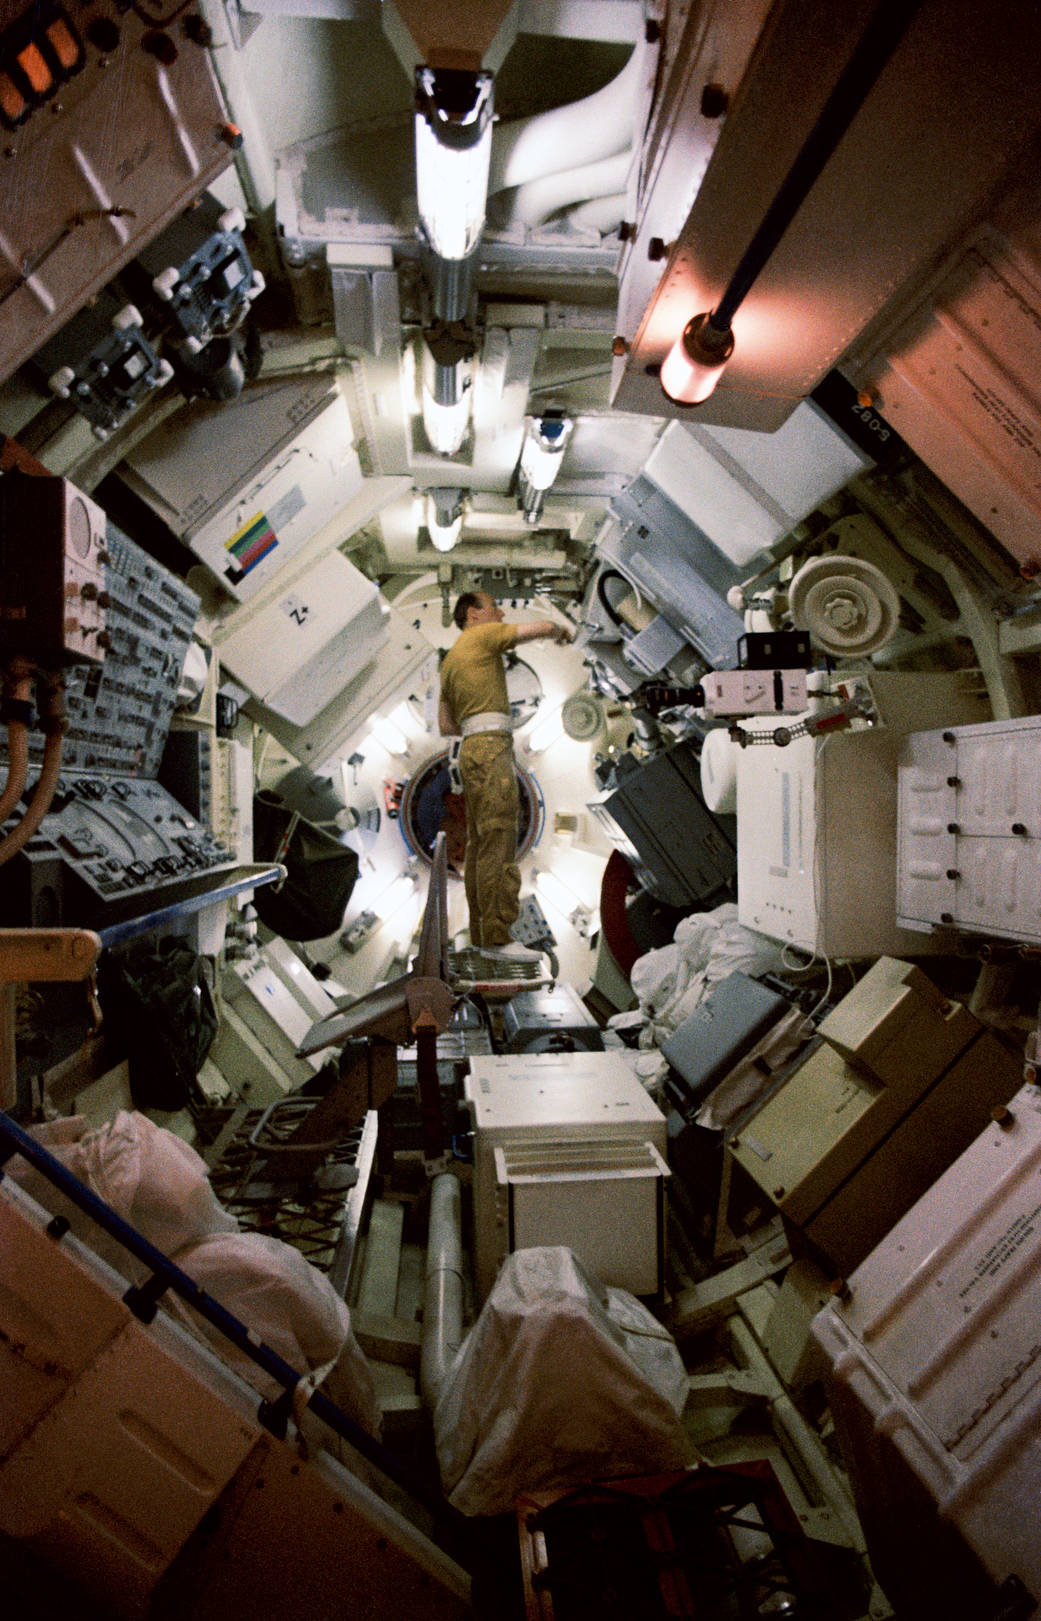 Astronaut in flight suit inside mock space station surrounded by boxes and containers